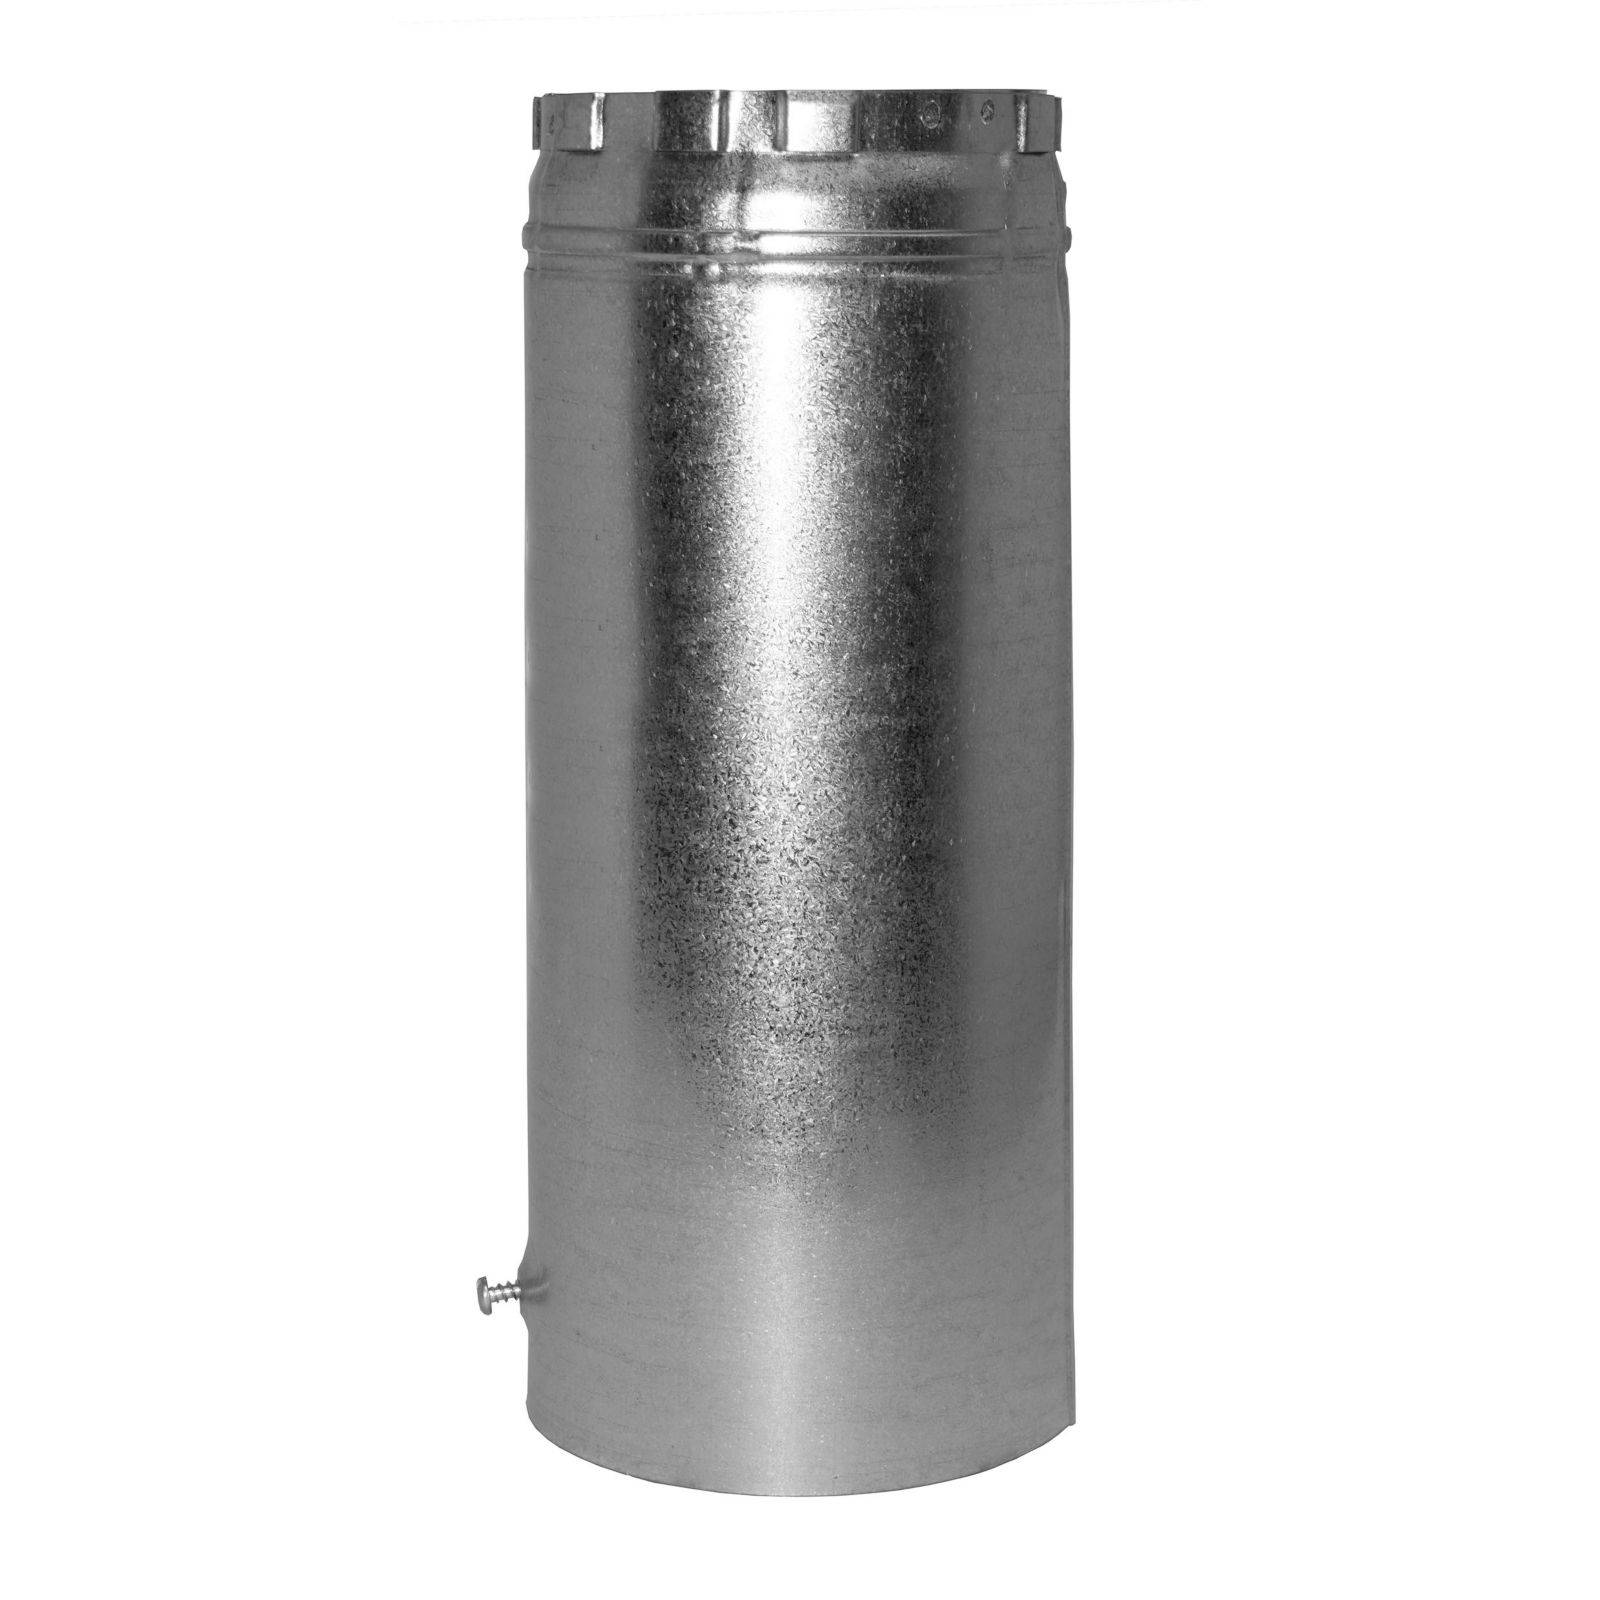 AmeriVent 8R12 - Pipe Section Type B Gas Vent, 8" Round X 12" Length